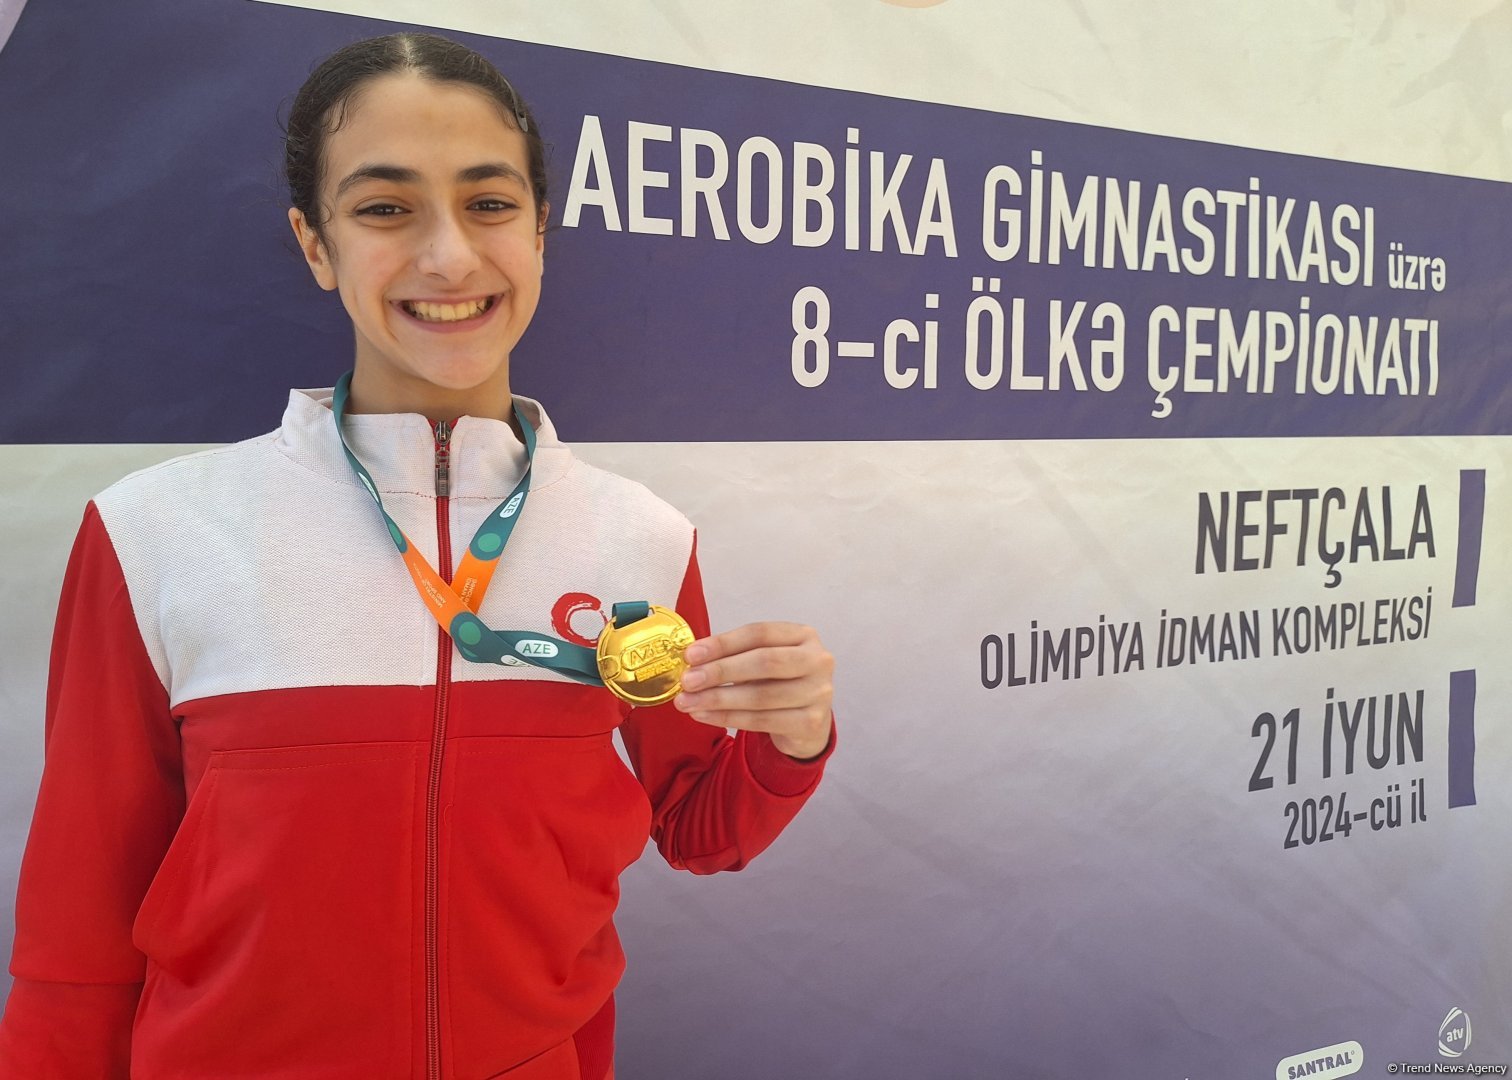 I diligently prepare for upcoming int'l competitions - winner of Azerbaijan's Aerobic Gymnastics Championship